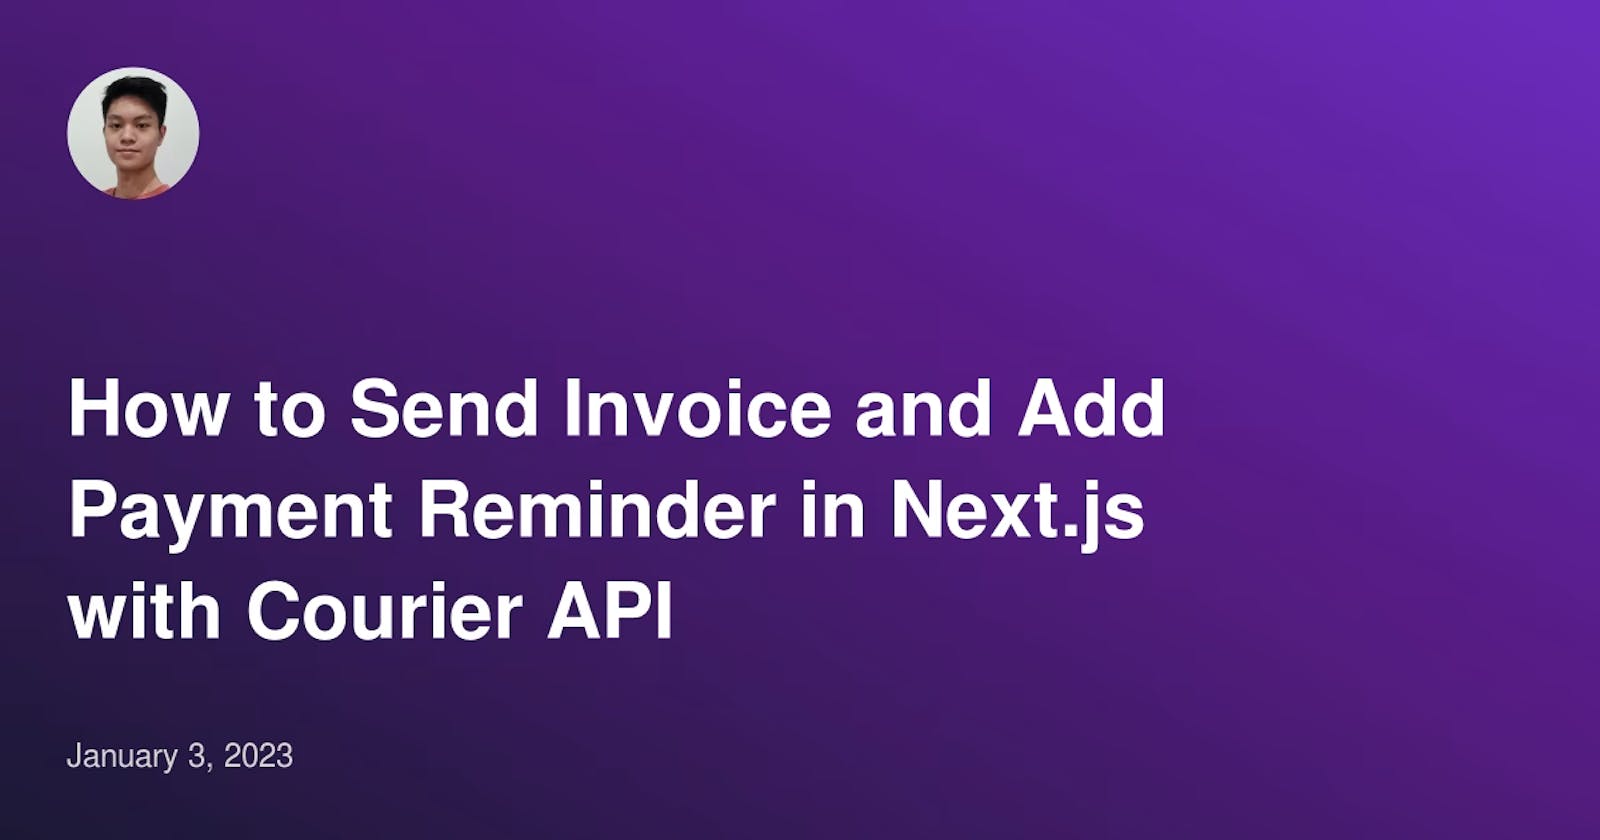 How to Send Invoice and Add Payment Reminder in Next.js with Courier API